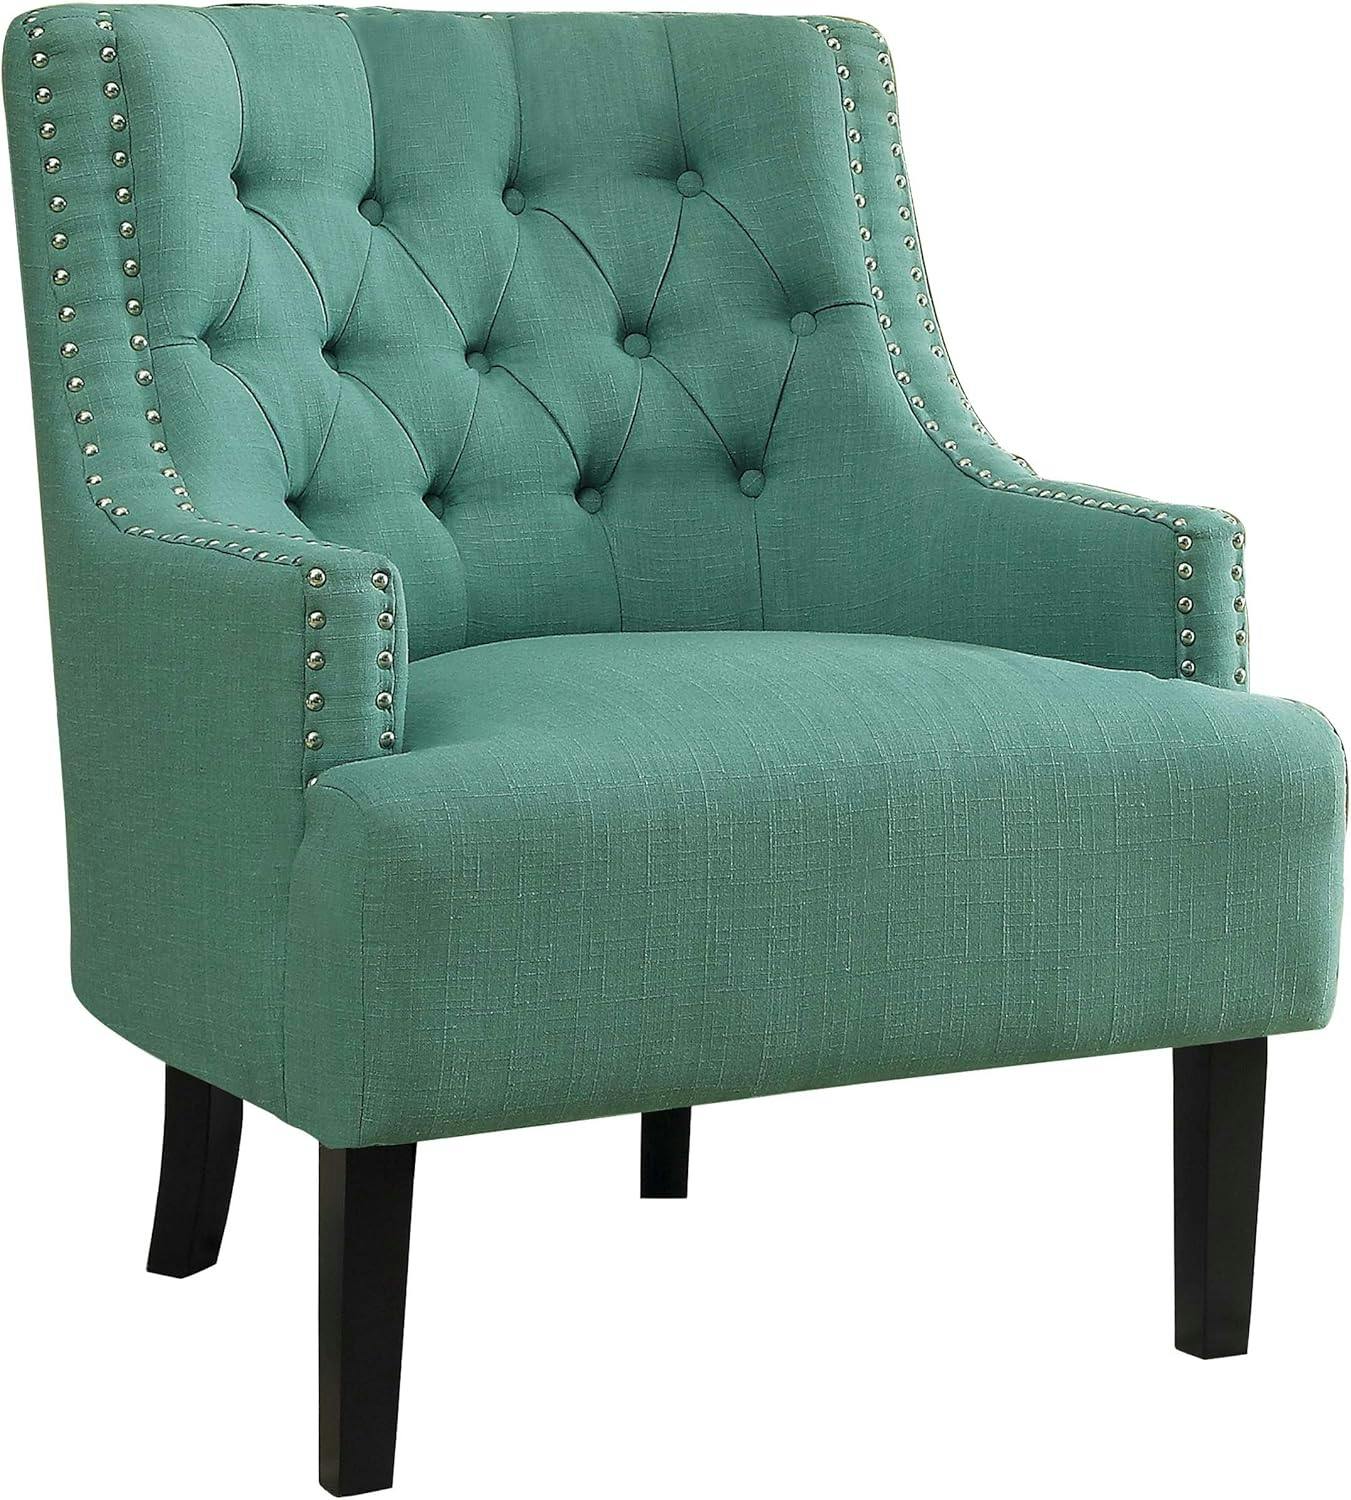 Teal Transitional Diamond Tufted Accent Chair with Nailhead Trim